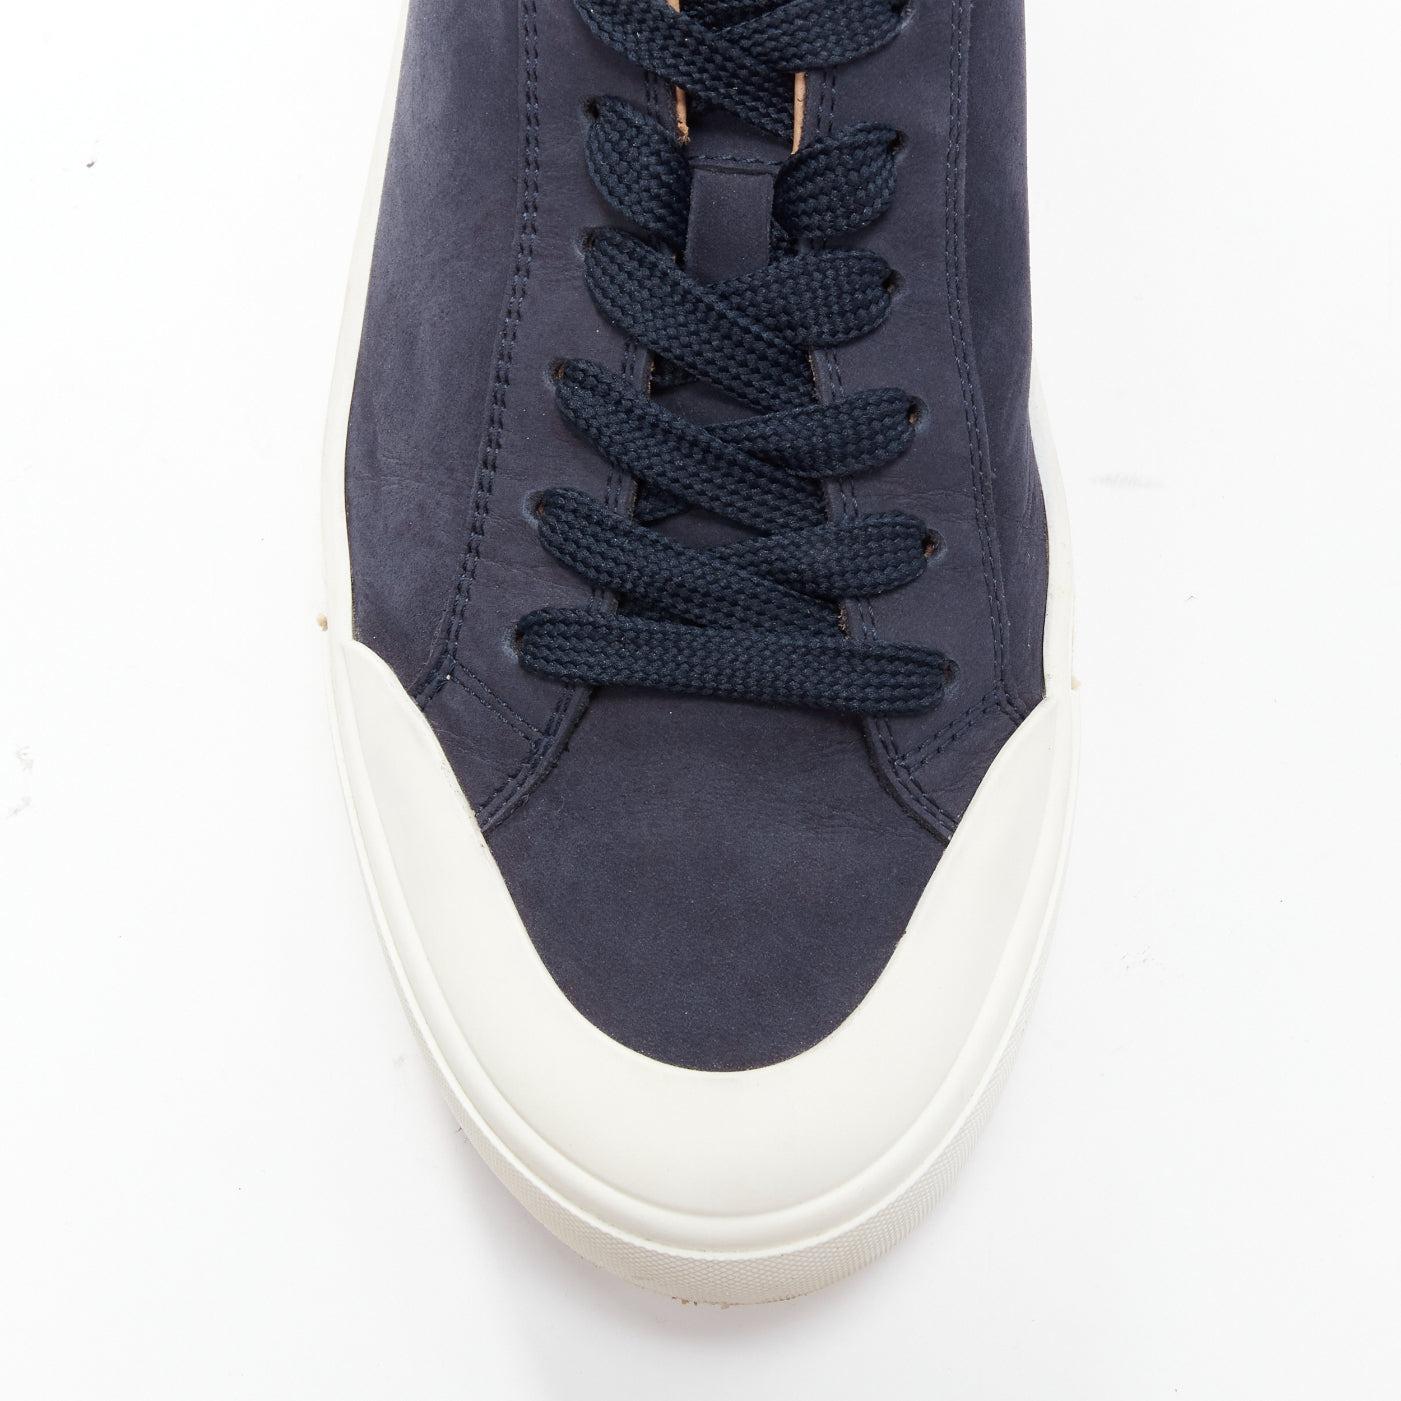 TOD'S navy suede leather espadrille sole low top sneakers UK7.5 EU41.5 1